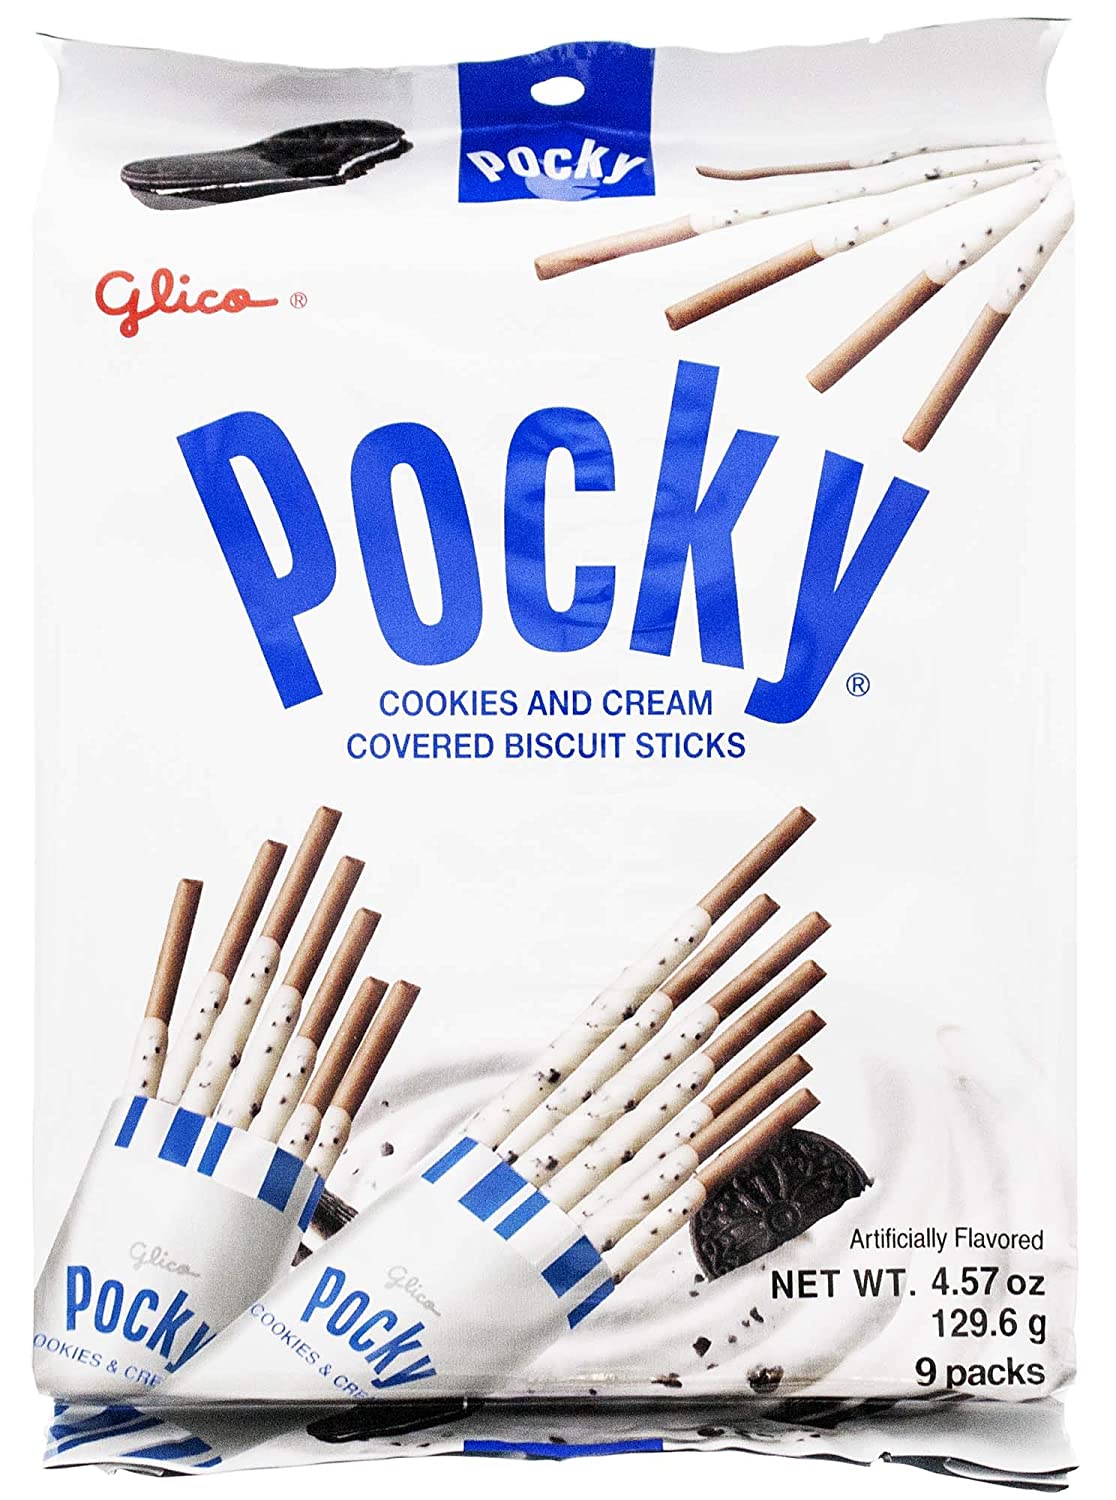 4.57-Oz Glico Pocky Cookies & Cream Covered Biscuit Sticks (9 Individual Bags) $3.30 w/ S&S + Free Shipping w/ Prime or $25+